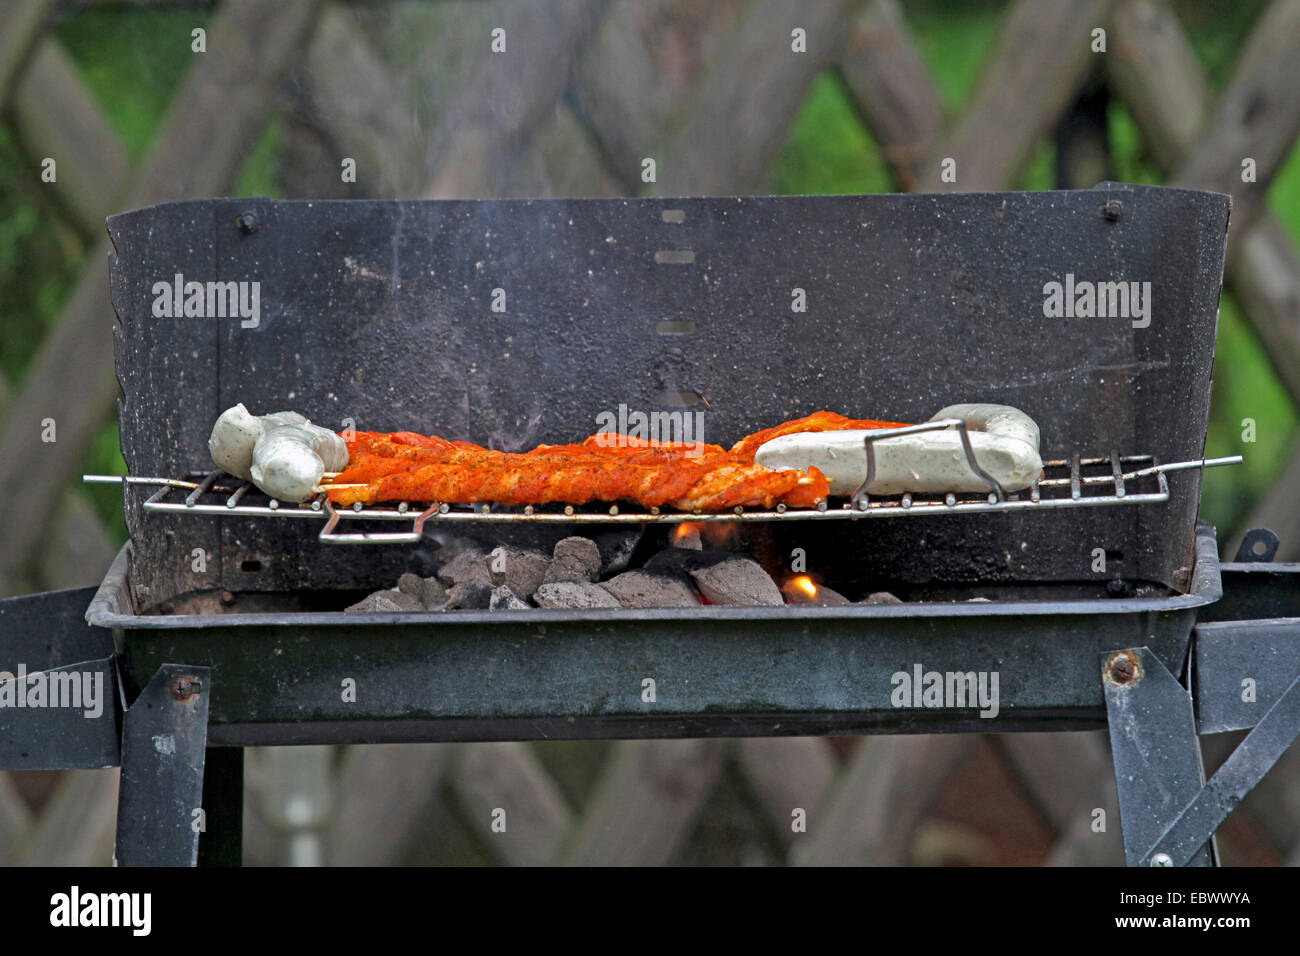 grill meat on a customary charcoal grill, Germany Stock Photo